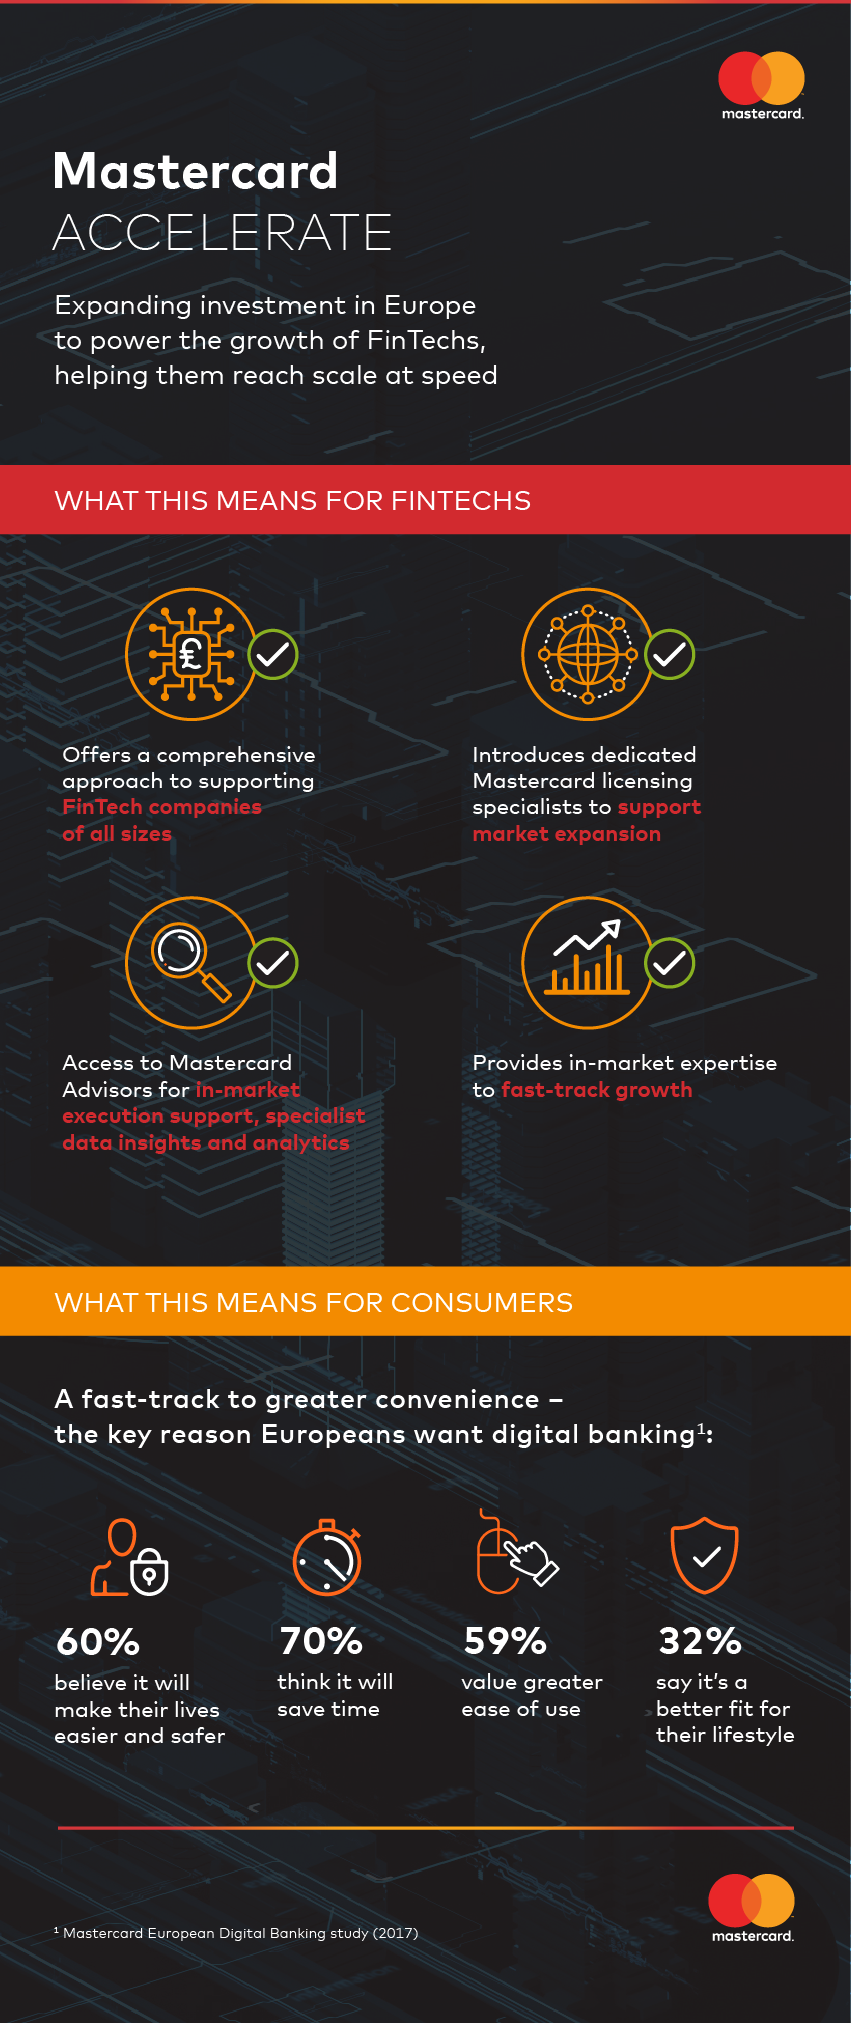 Mastercard Accelerate launch_Infographic